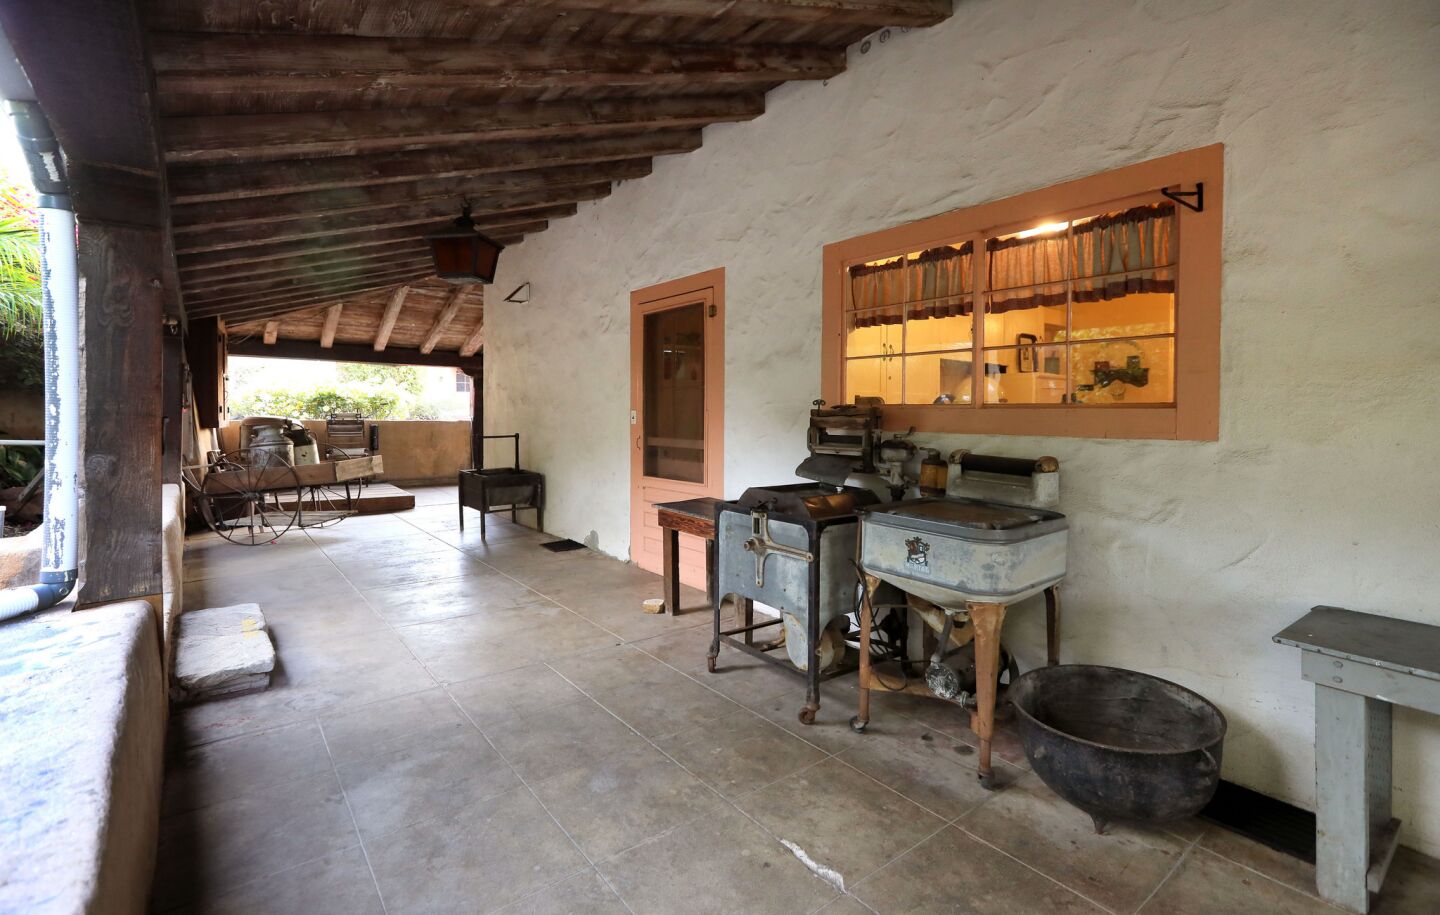 View of a covered patio near the kitchen at the Rancho Buena Vista Adobe. A walled-off root cellar was situated underneath this walkway in the 1800s. Spirits on the property have said that men were kept captive in the root cellar.